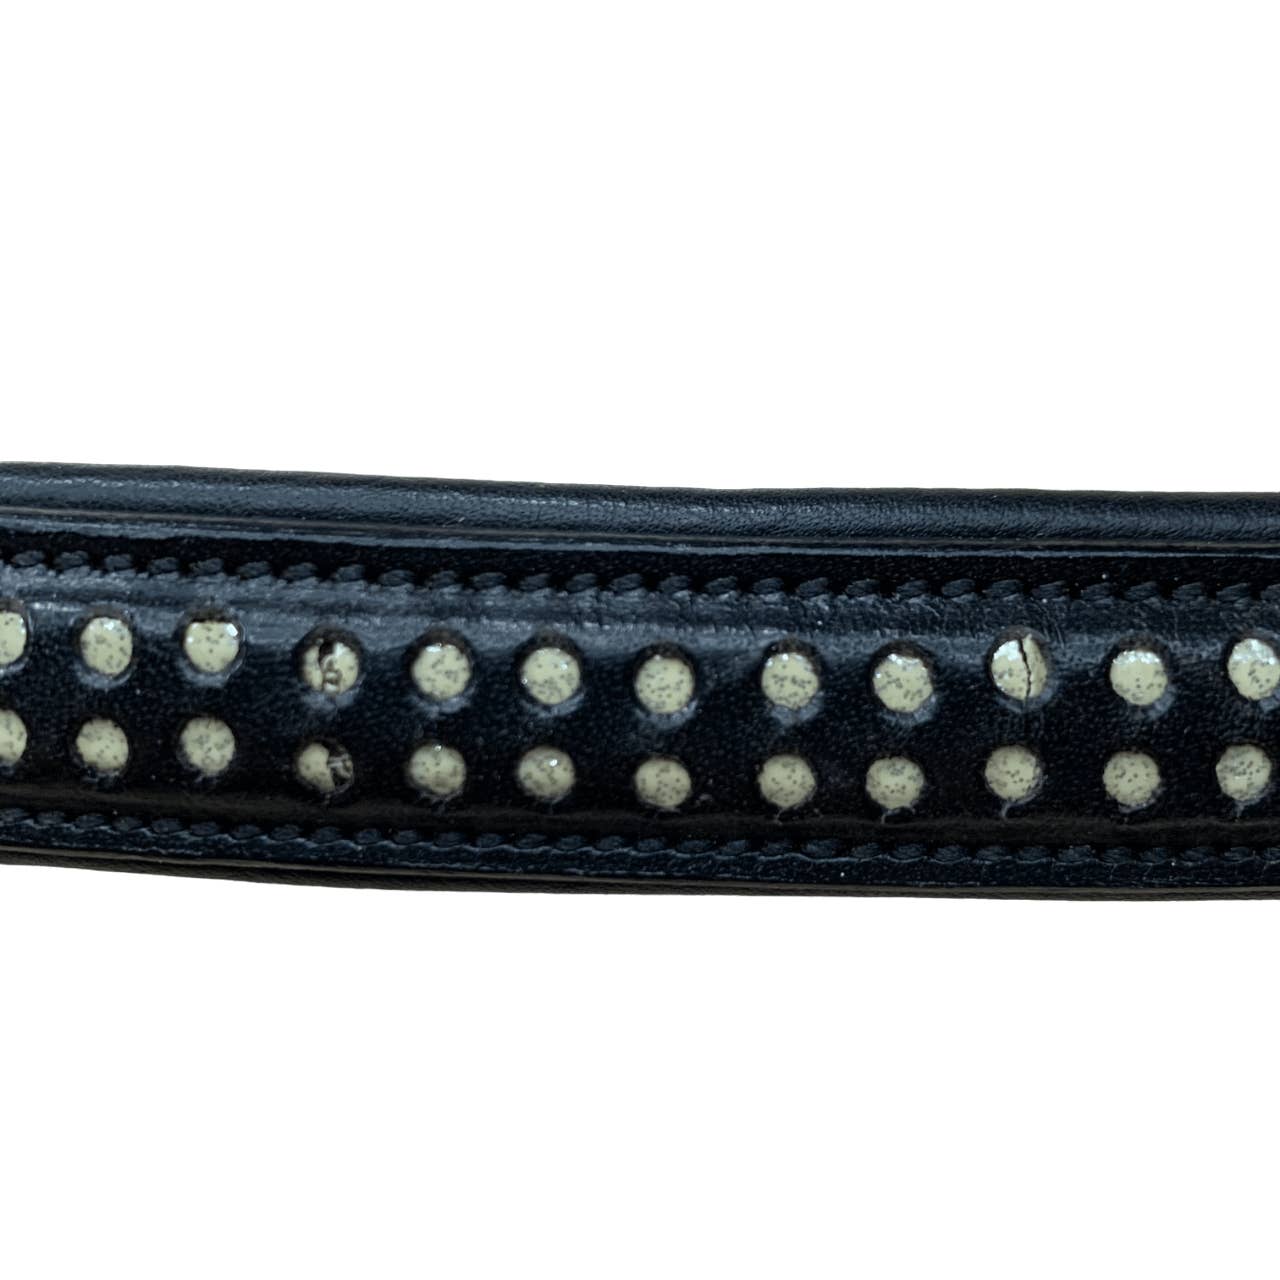 Ovation 'Danimo Dots Cutout' Browband in Black - Full